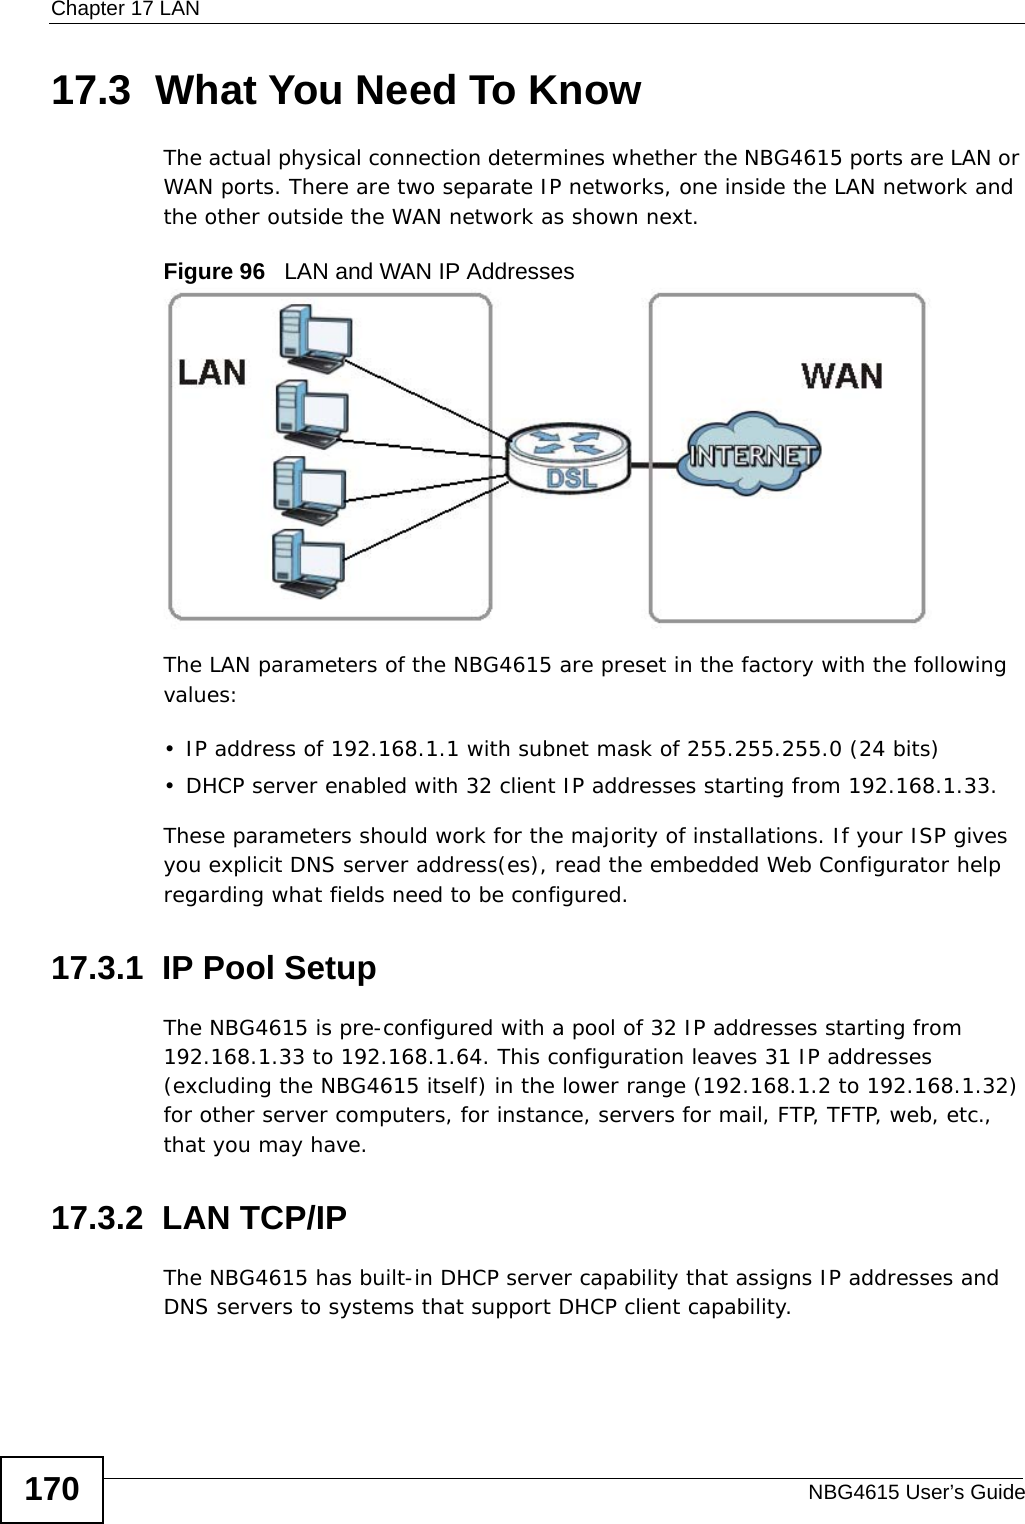 Chapter 17 LANNBG4615 User’s Guide17017.3  What You Need To KnowThe actual physical connection determines whether the NBG4615 ports are LAN or WAN ports. There are two separate IP networks, one inside the LAN network and the other outside the WAN network as shown next.Figure 96   LAN and WAN IP AddressesThe LAN parameters of the NBG4615 are preset in the factory with the following values:• IP address of 192.168.1.1 with subnet mask of 255.255.255.0 (24 bits)• DHCP server enabled with 32 client IP addresses starting from 192.168.1.33. These parameters should work for the majority of installations. If your ISP gives you explicit DNS server address(es), read the embedded Web Configurator help regarding what fields need to be configured.17.3.1  IP Pool SetupThe NBG4615 is pre-configured with a pool of 32 IP addresses starting from 192.168.1.33 to 192.168.1.64. This configuration leaves 31 IP addresses (excluding the NBG4615 itself) in the lower range (192.168.1.2 to 192.168.1.32) for other server computers, for instance, servers for mail, FTP, TFTP, web, etc., that you may have.17.3.2  LAN TCP/IP The NBG4615 has built-in DHCP server capability that assigns IP addresses and DNS servers to systems that support DHCP client capability.